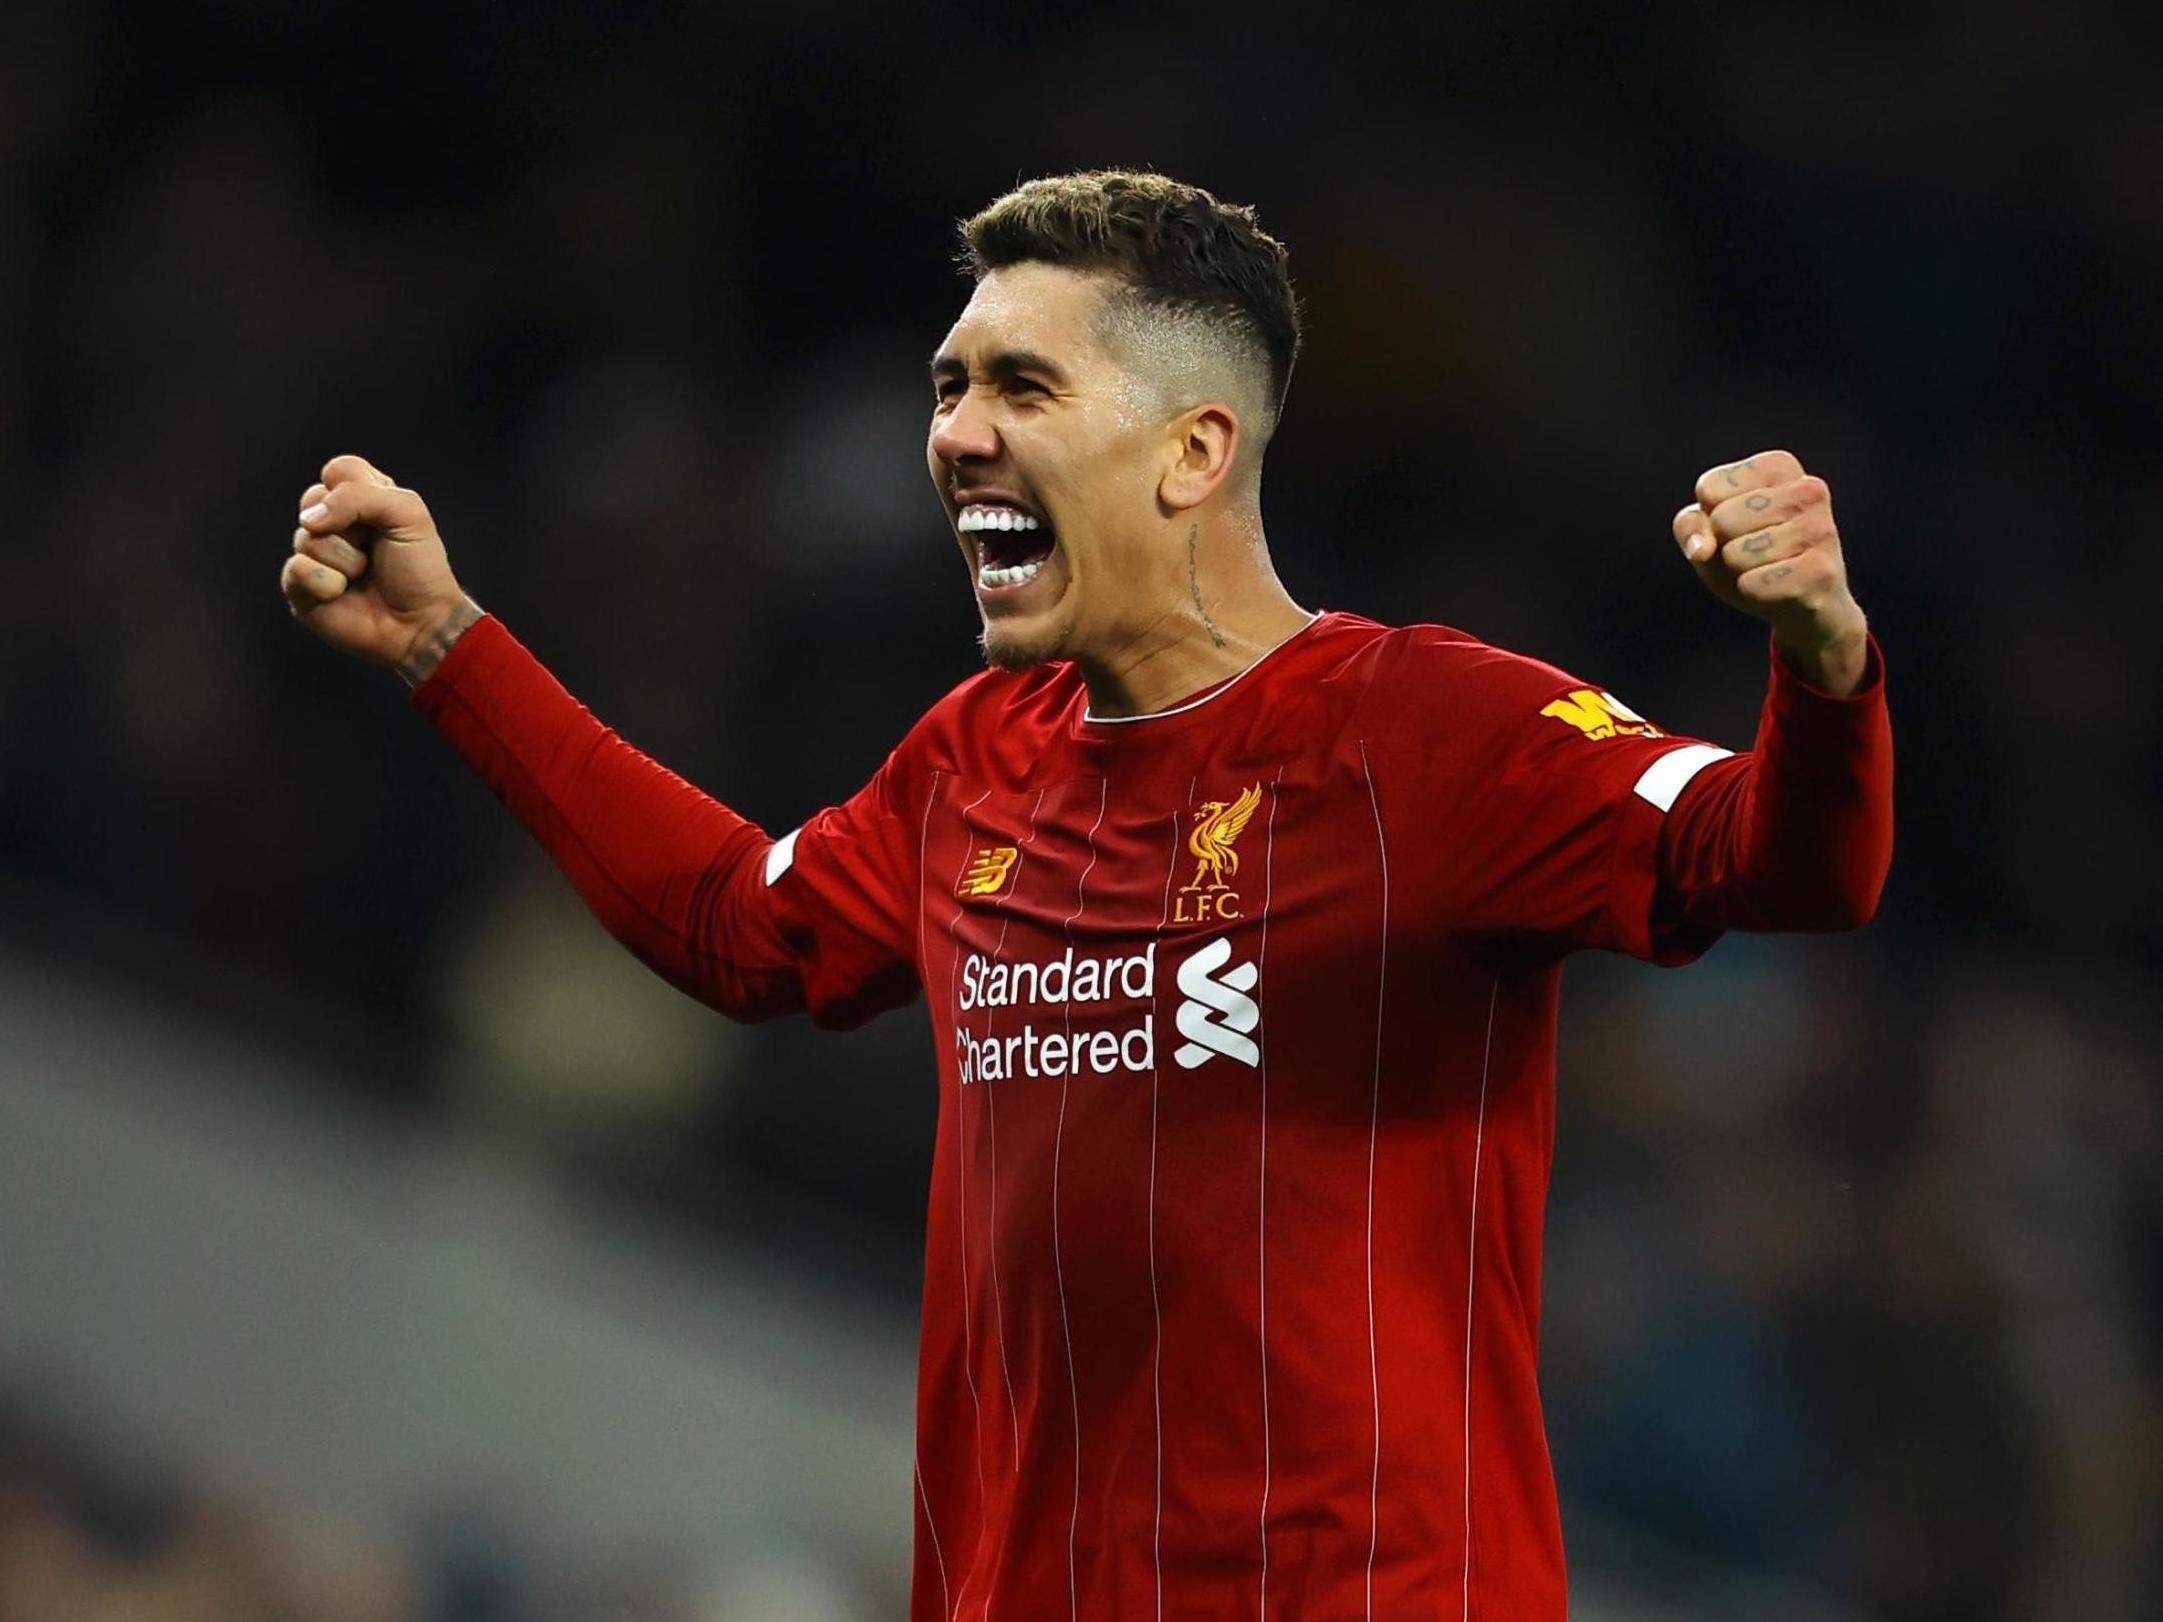 Roberto Firmino has become integral to Liverpool's football